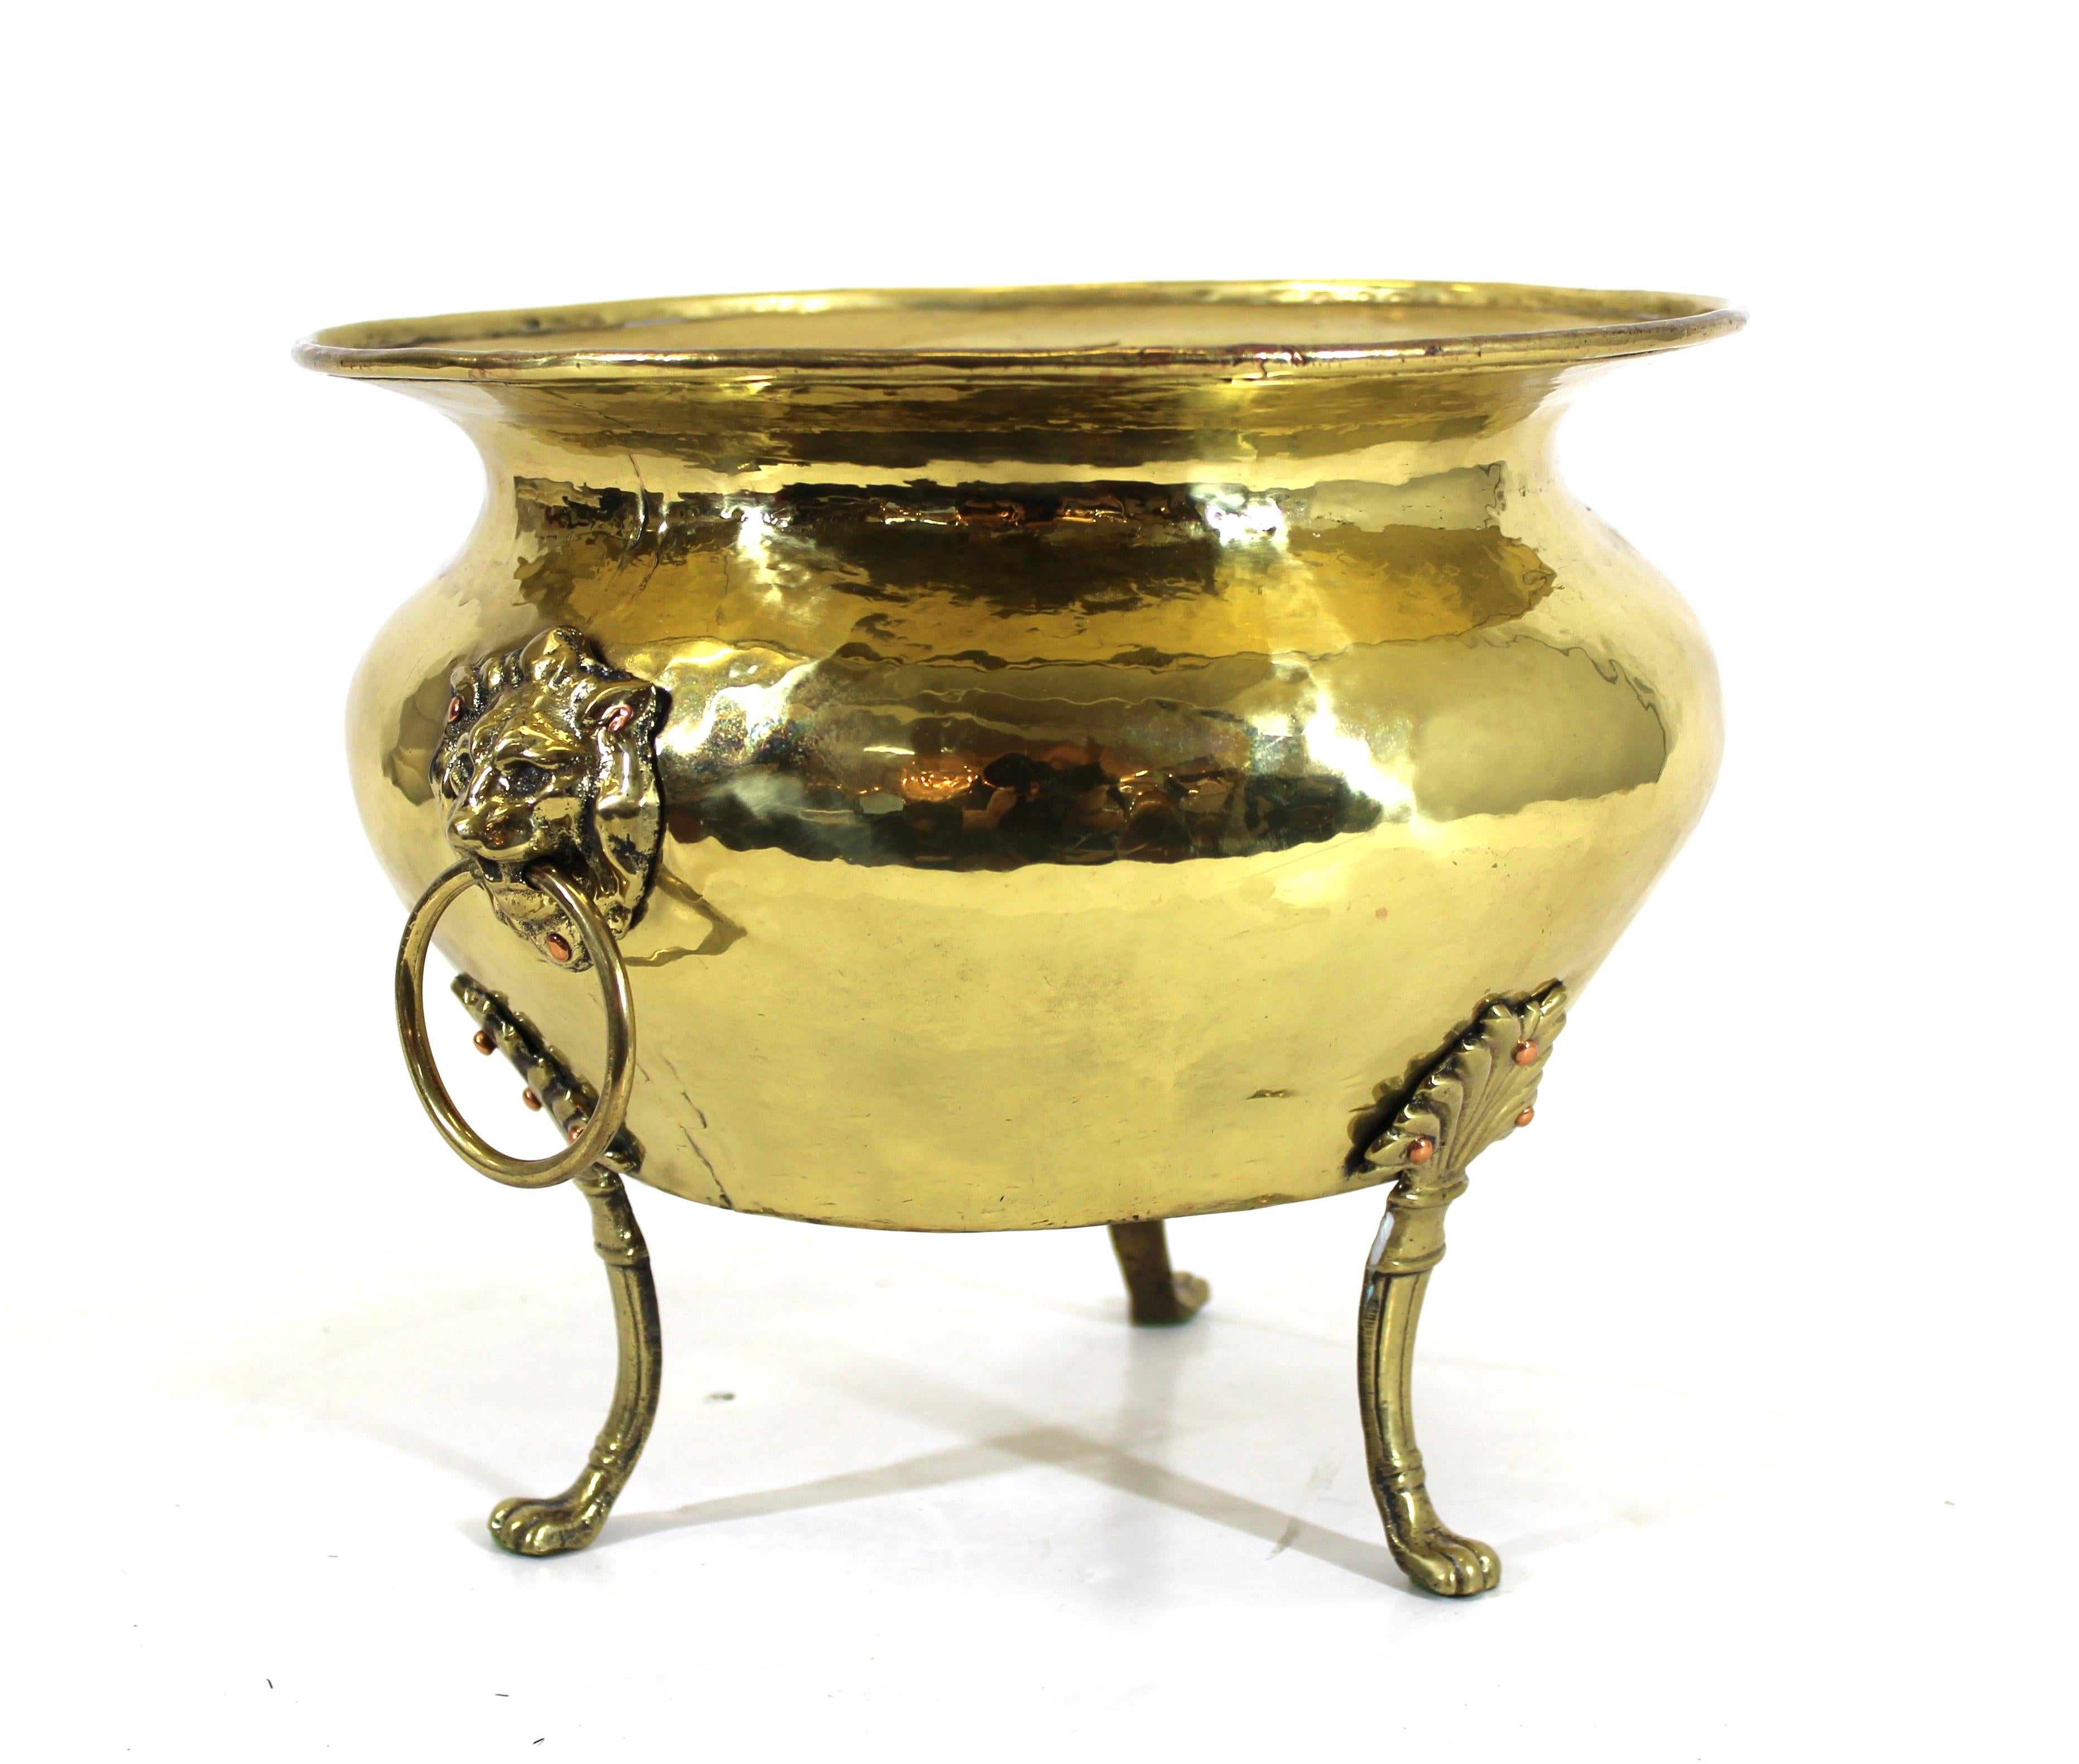 Arts and Crafts antique brass jardinière or planter with lion head handles, hand hammered with seams. Made in Russia in the 1910s, with Russian makers mark embossed to the bottom. In very good vintage condition.